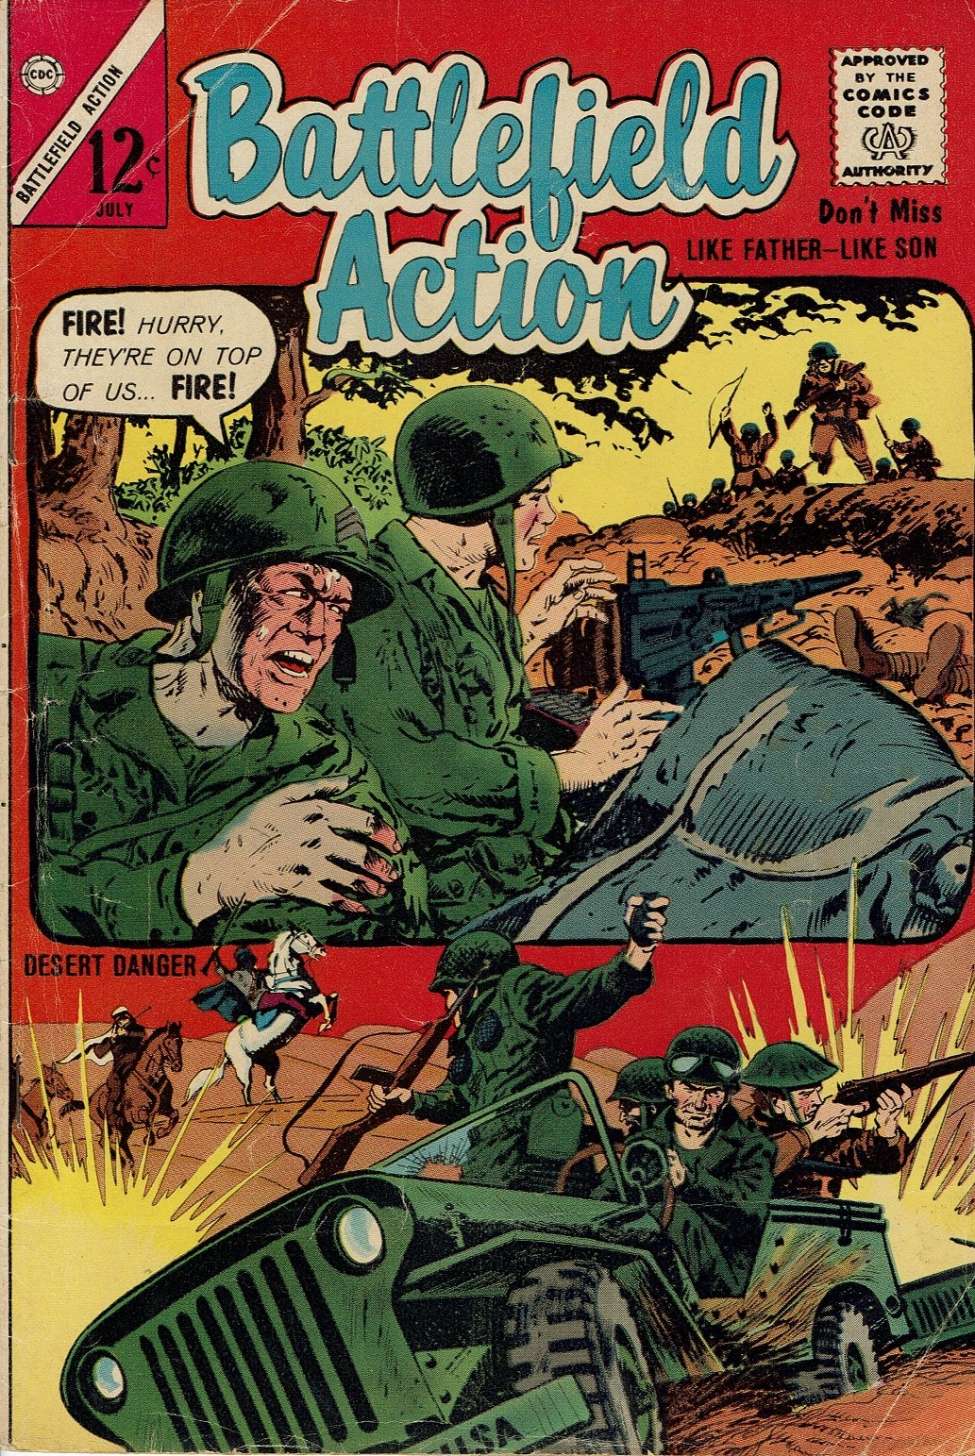 Book Cover For Battlefield Action 48